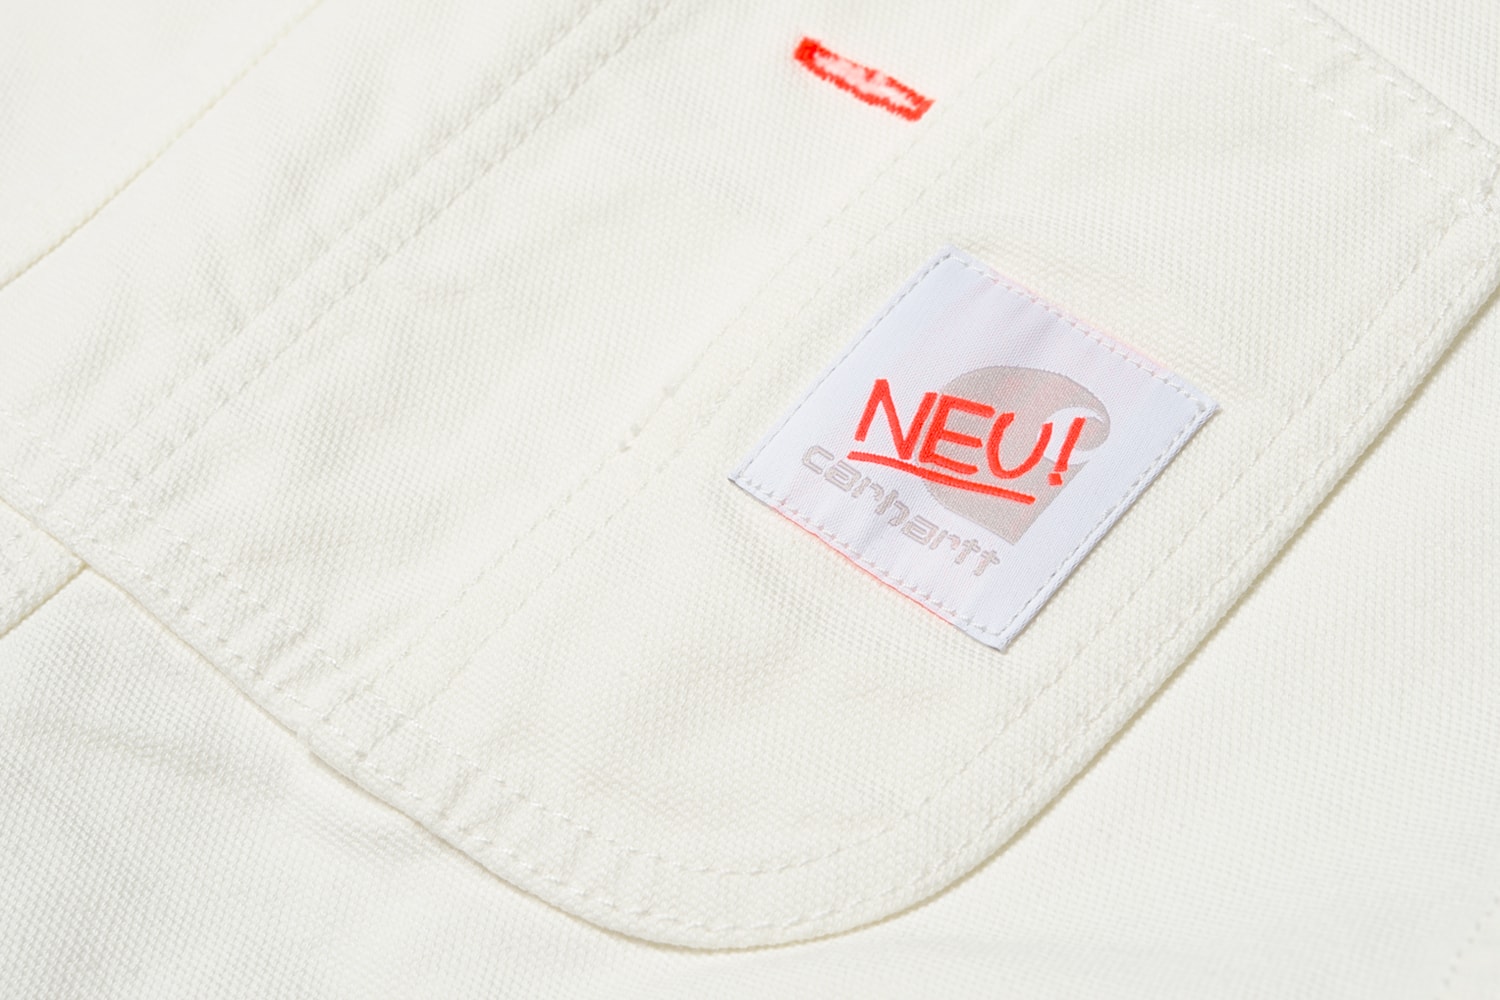 Carhartt WIP Neu! Capsule Collection release info T-shirts socks tote bag overalls